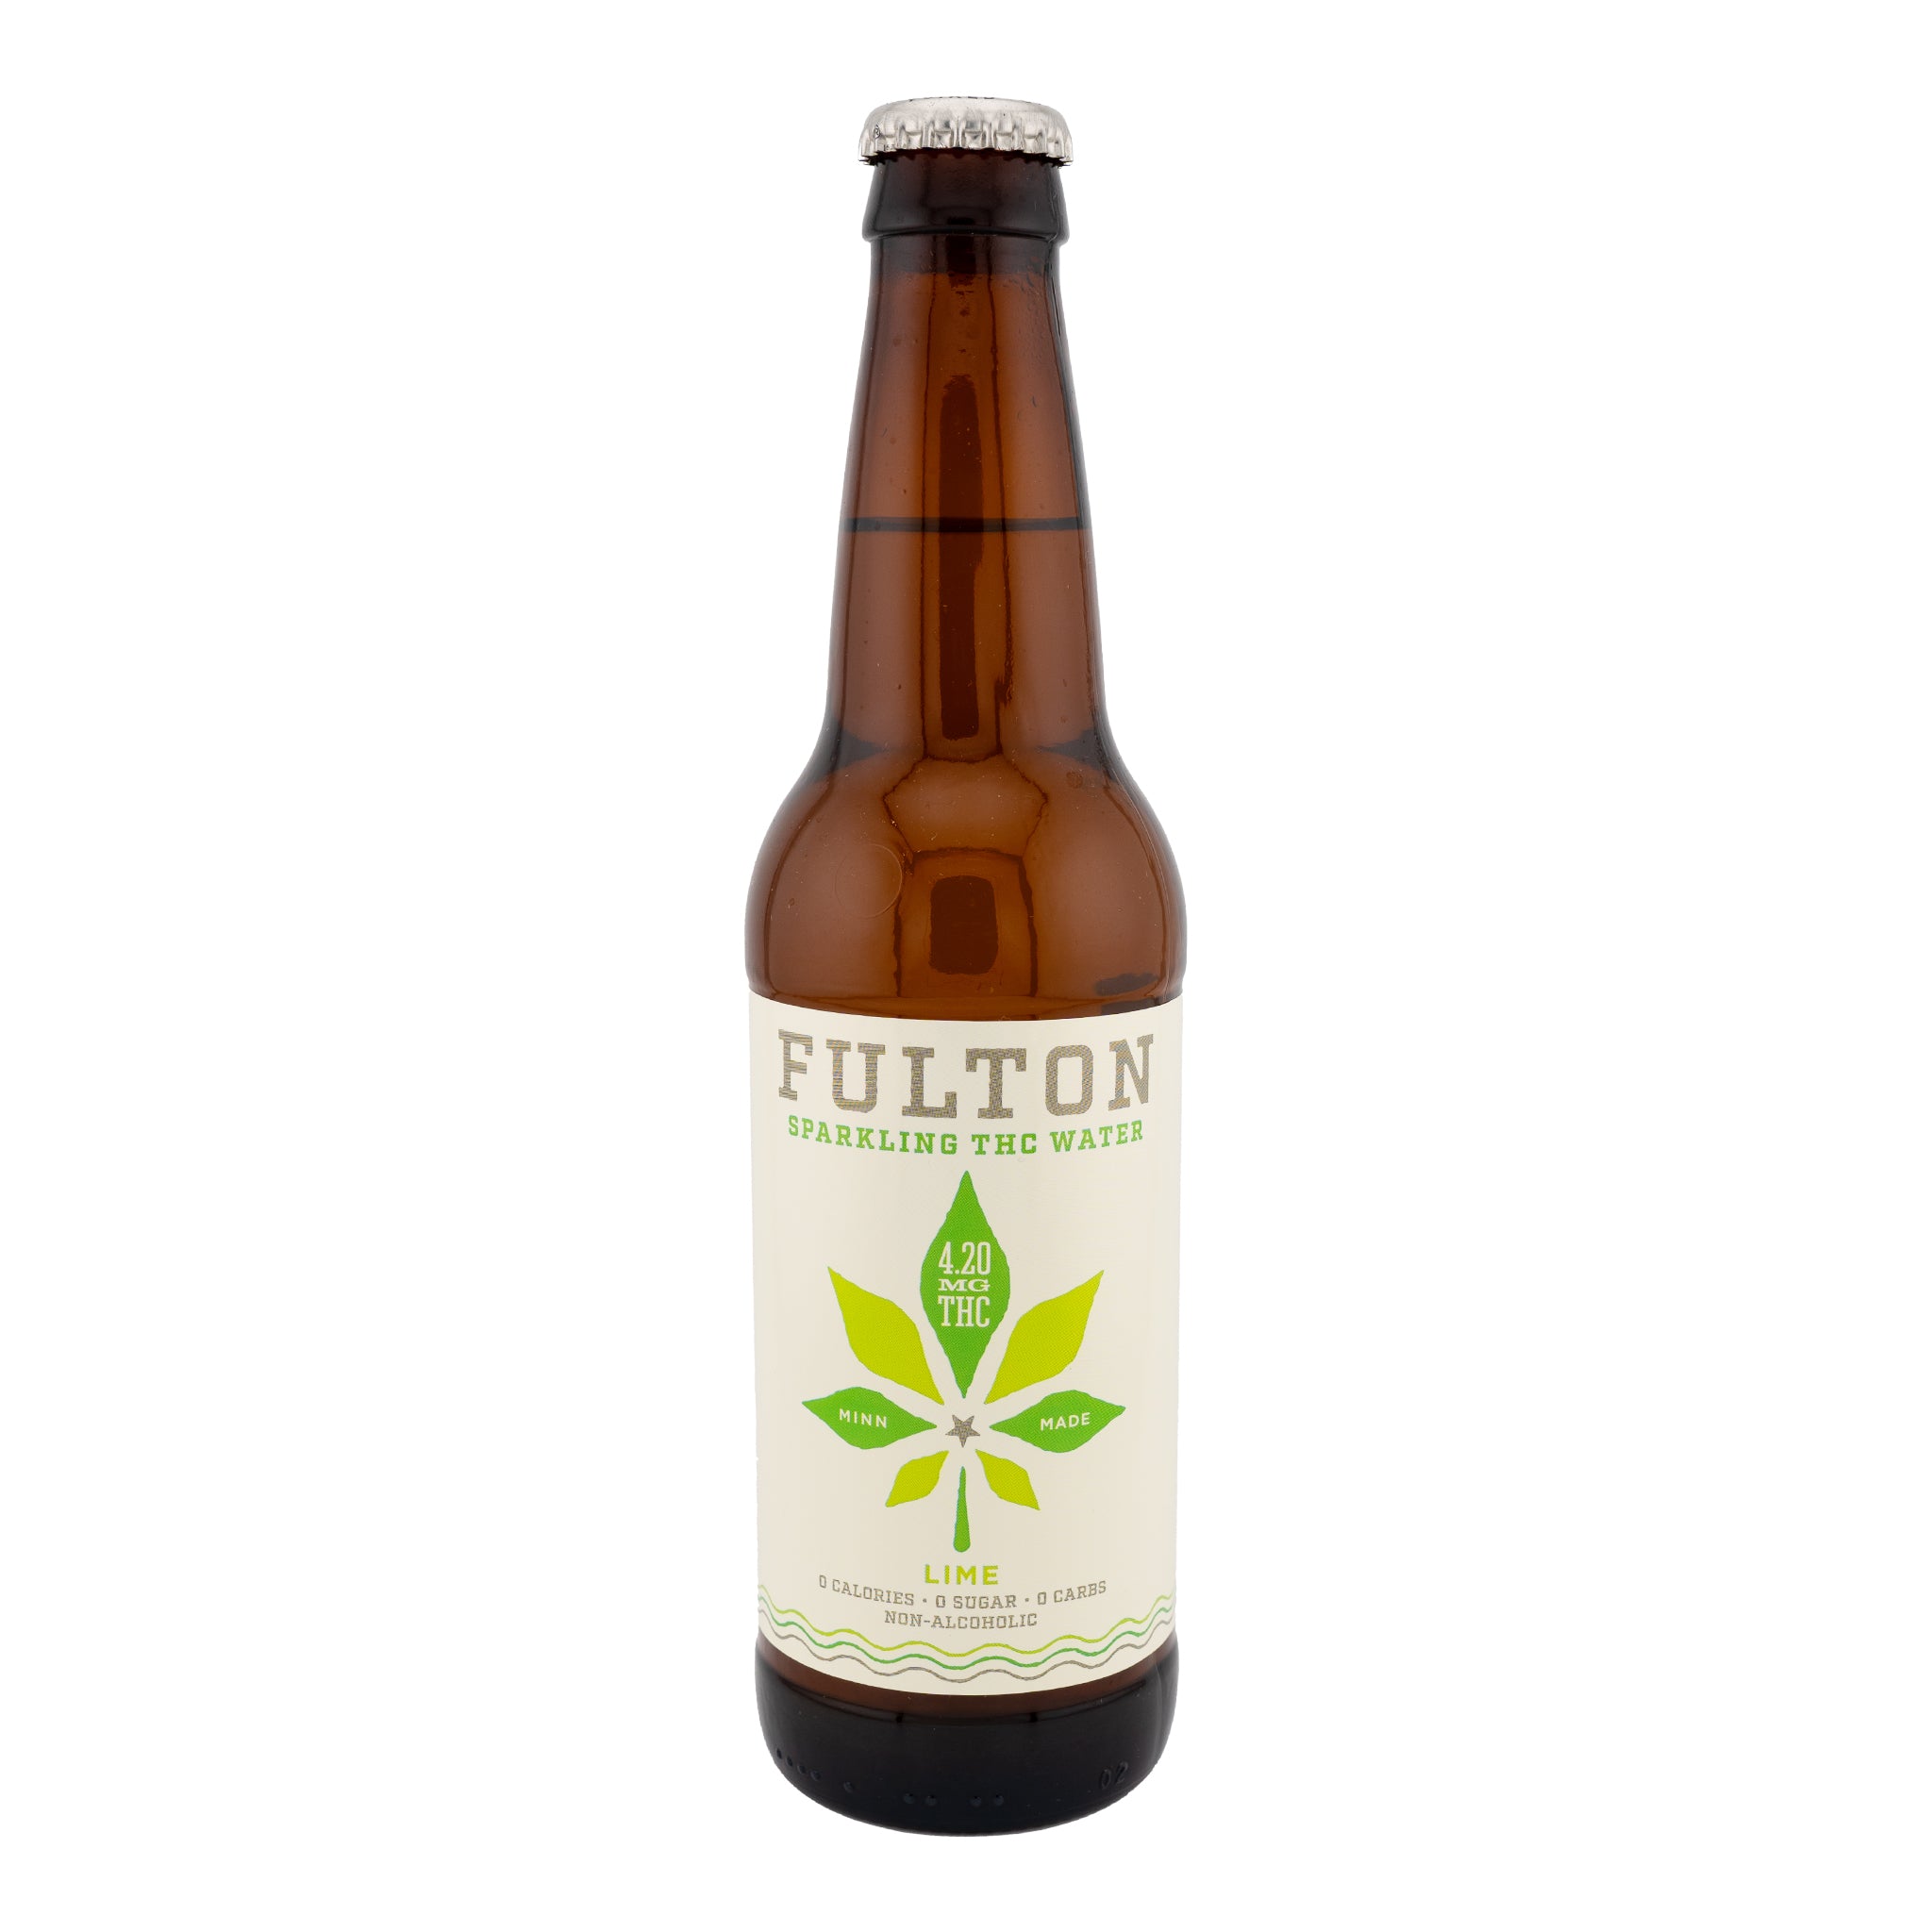 FULTON Sparkling Water 5mg THC (2 Flavors)